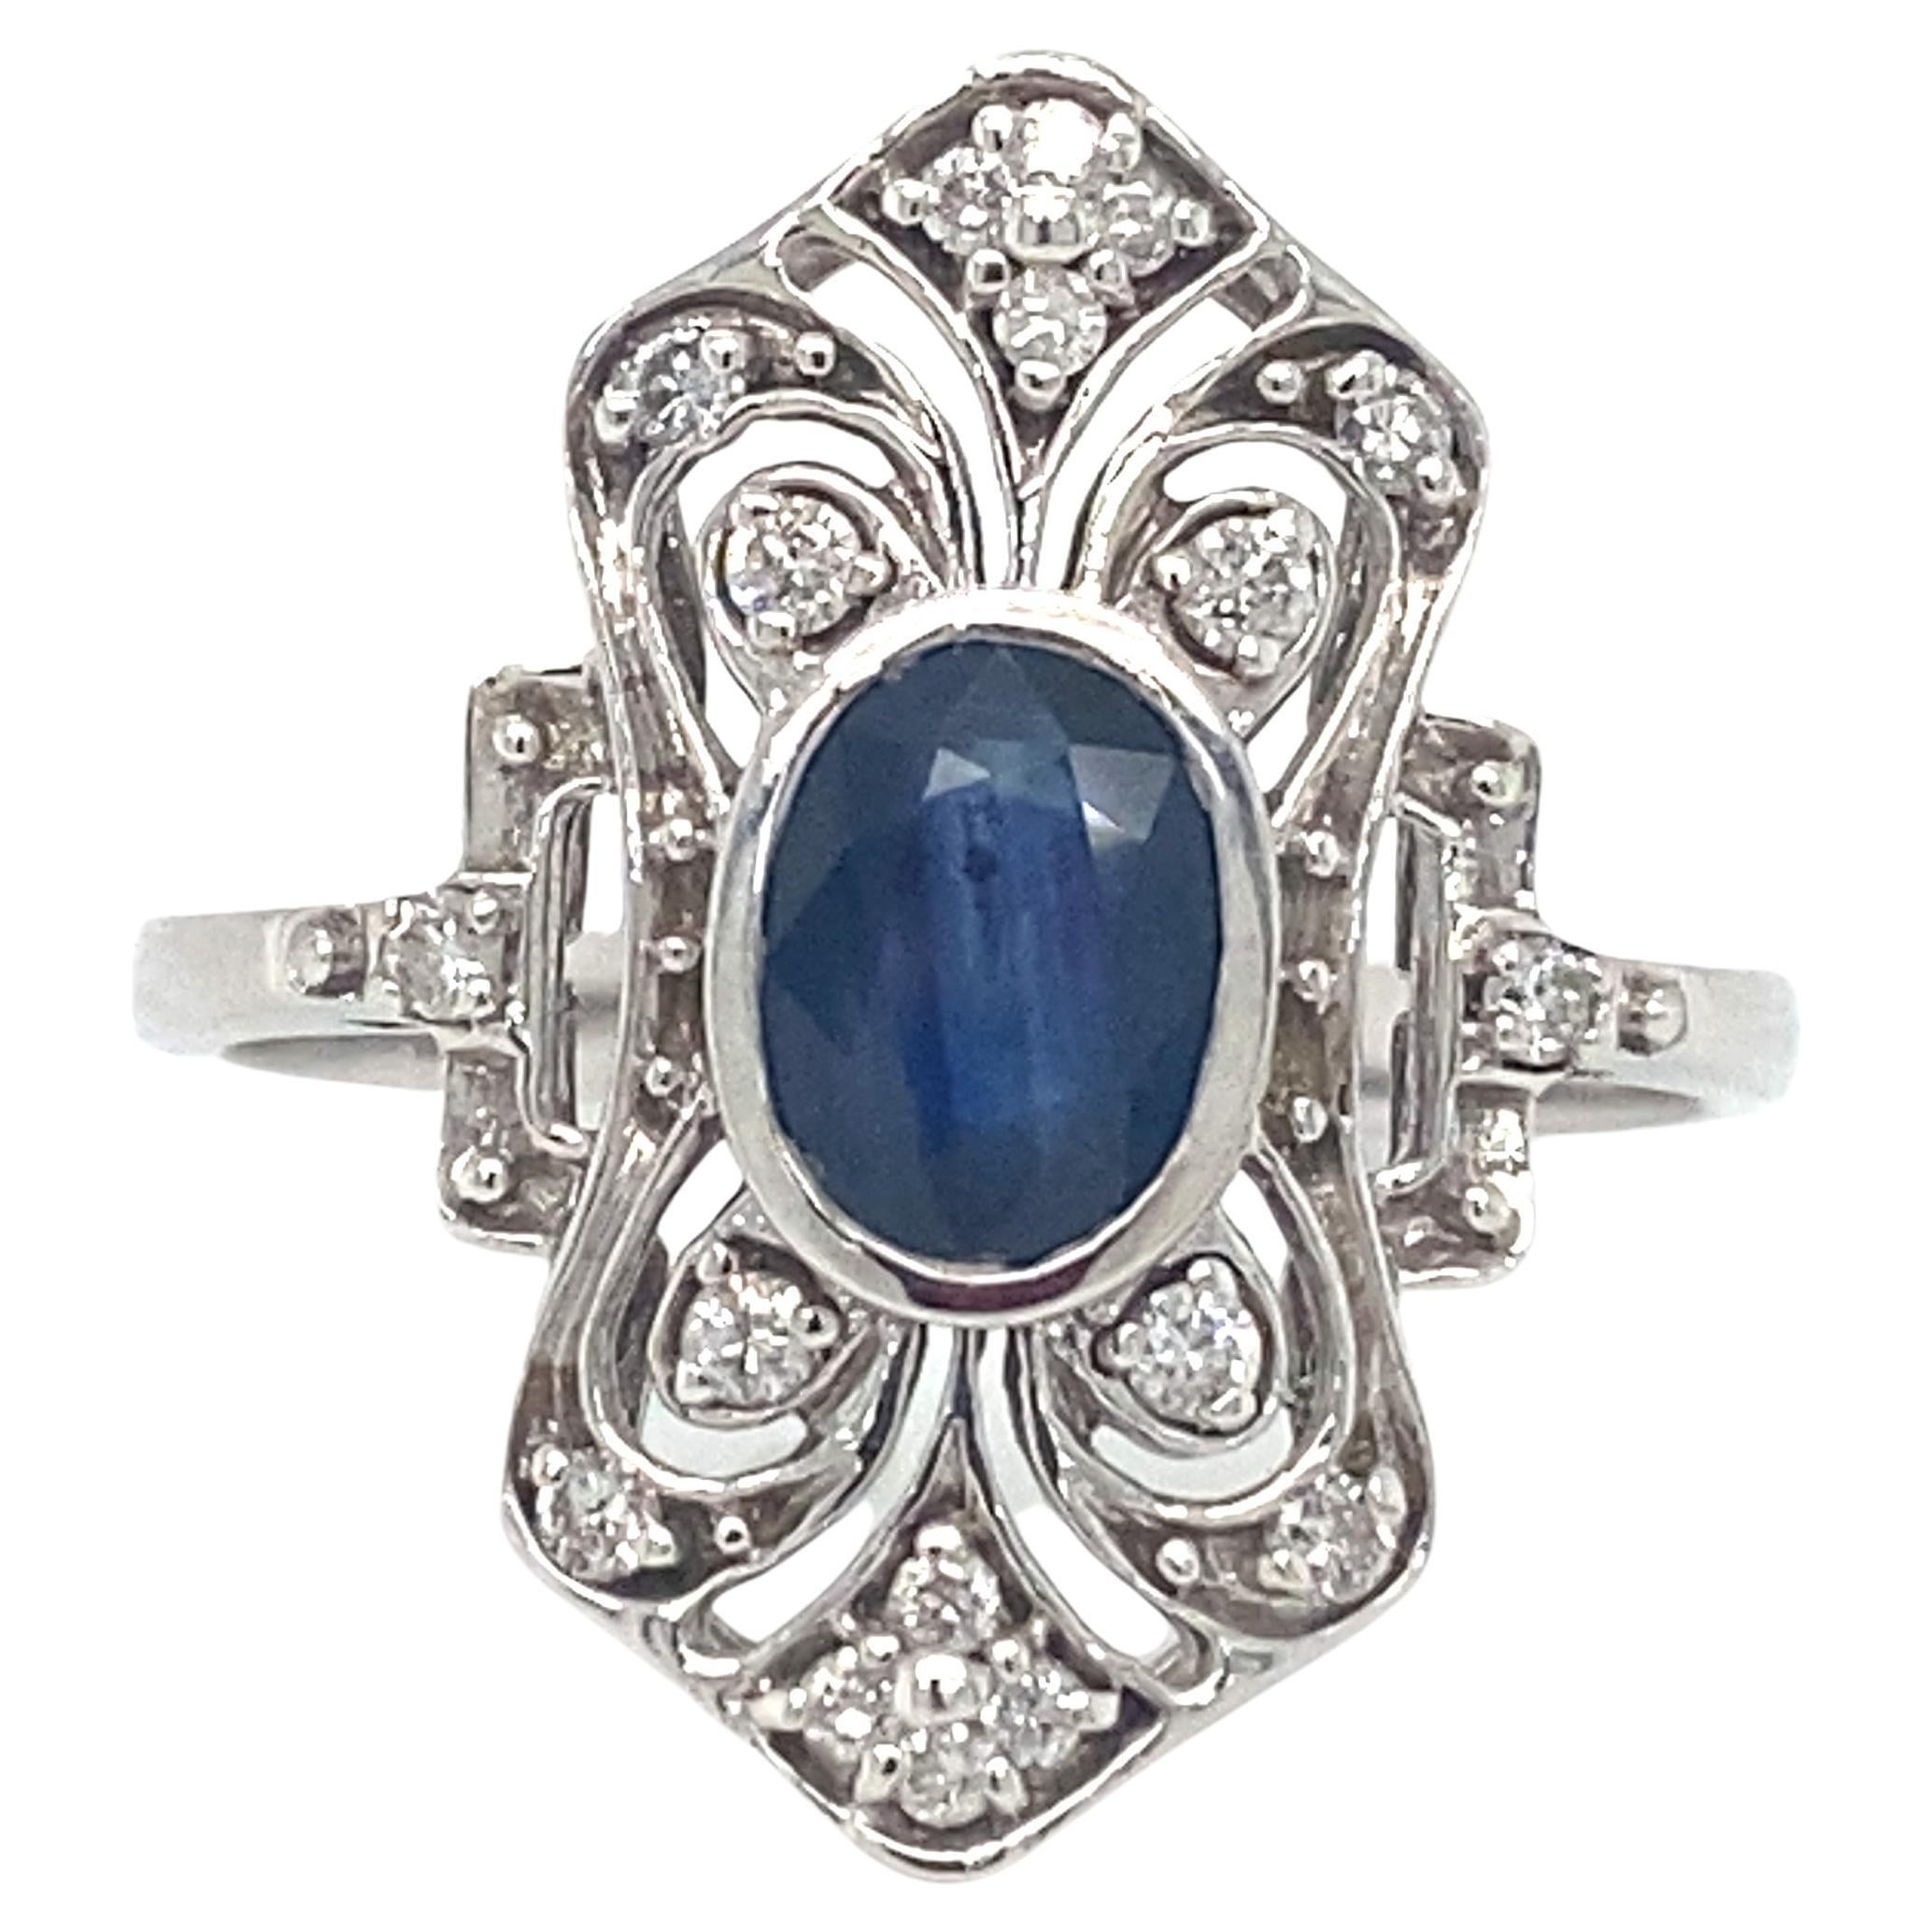 Circa 1950s Art Deco Style Sapphire and Diamond Cocktail Ring in 14K White Gold For Sale